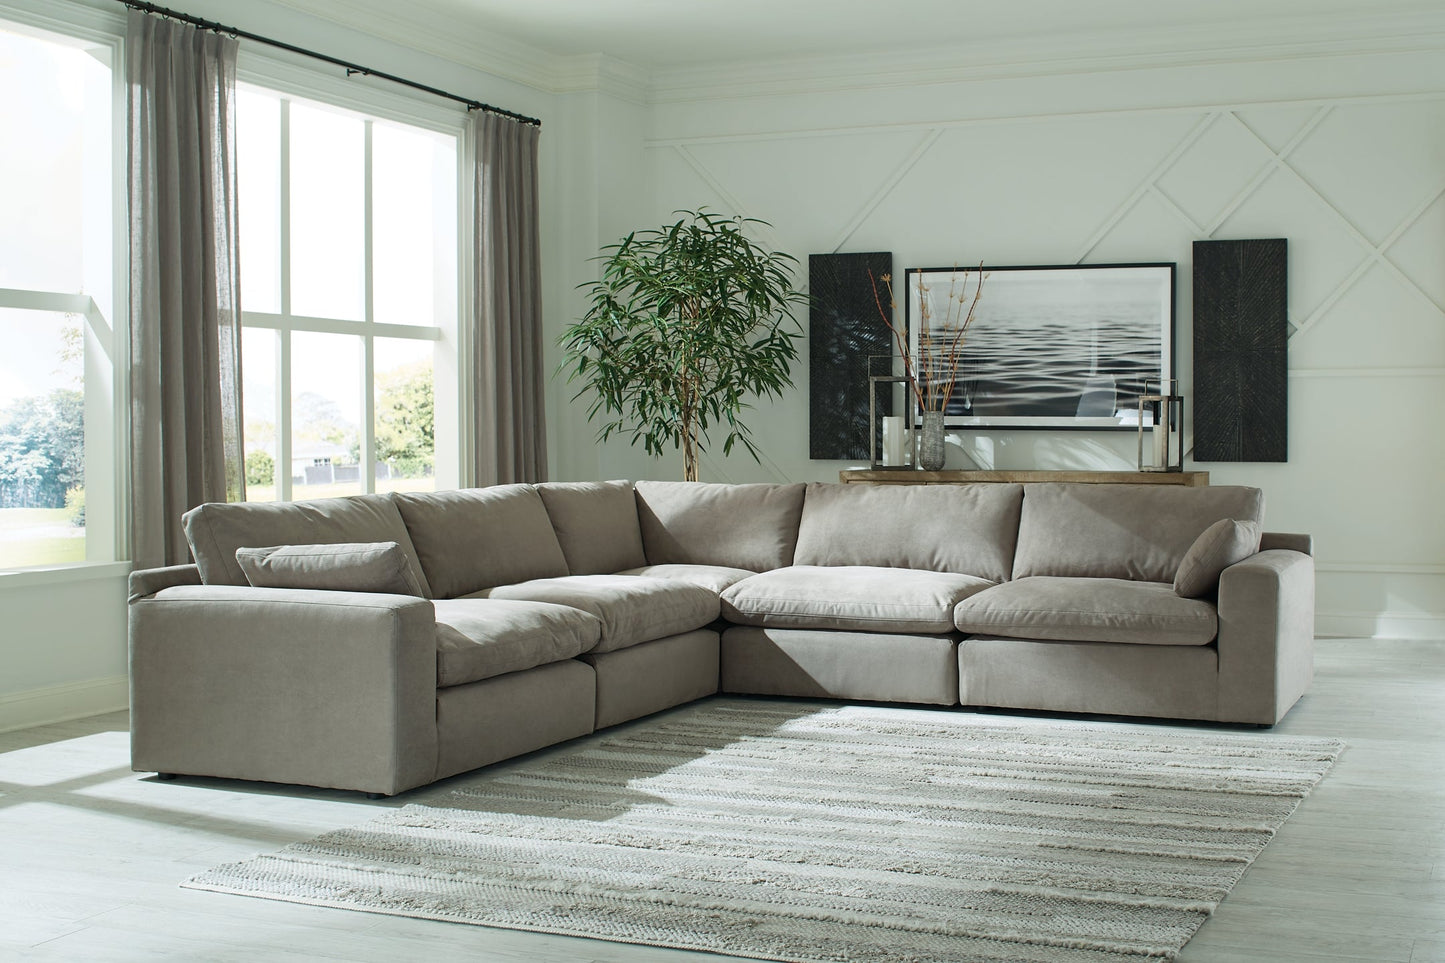 Next-Gen Gaucho 5-Piece Sectional Rent Wise Rent To Own Jacksonville, Florida